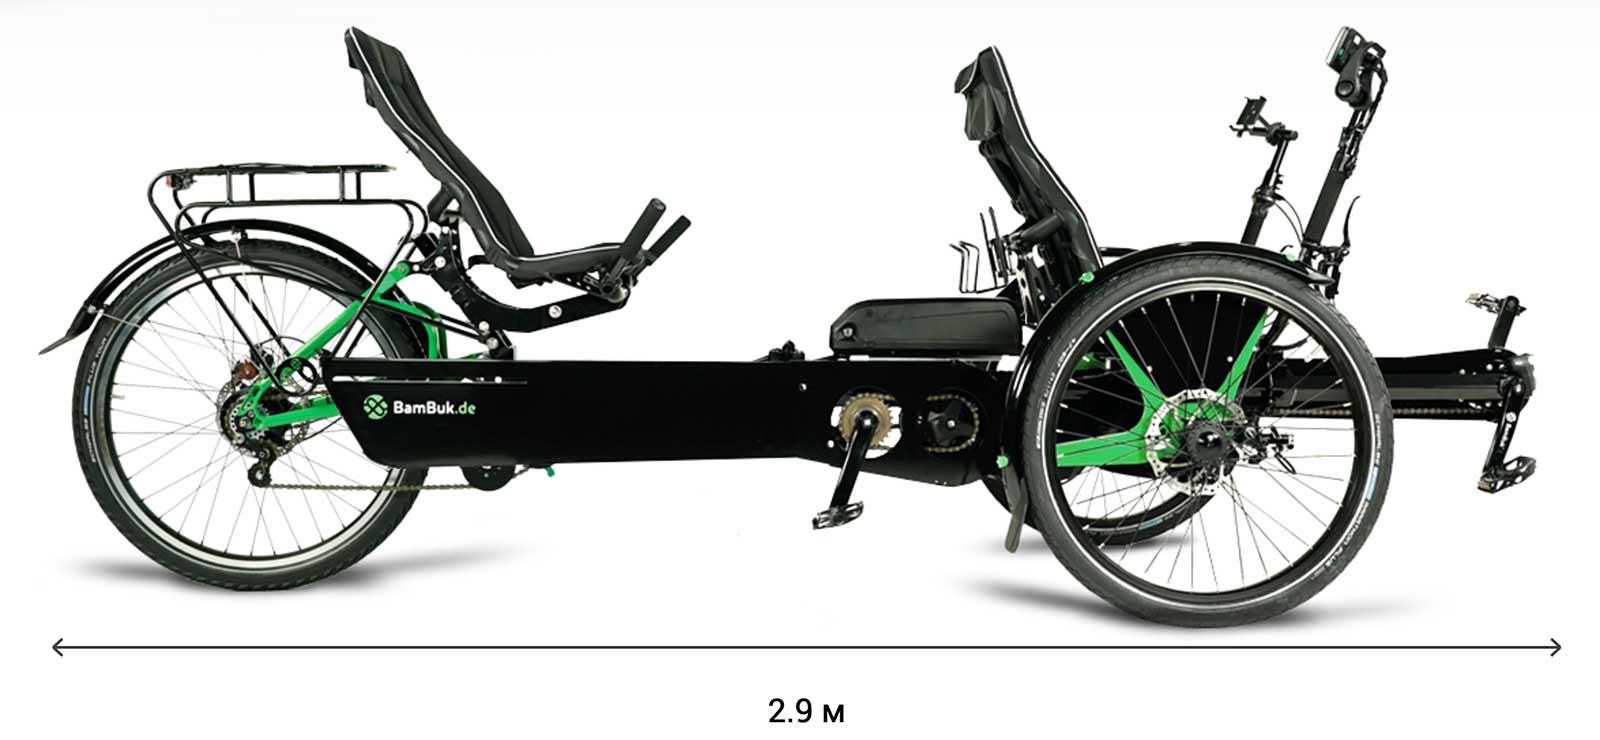 BamBuk E-Trike Tandem fully extended is 2.9 meters long